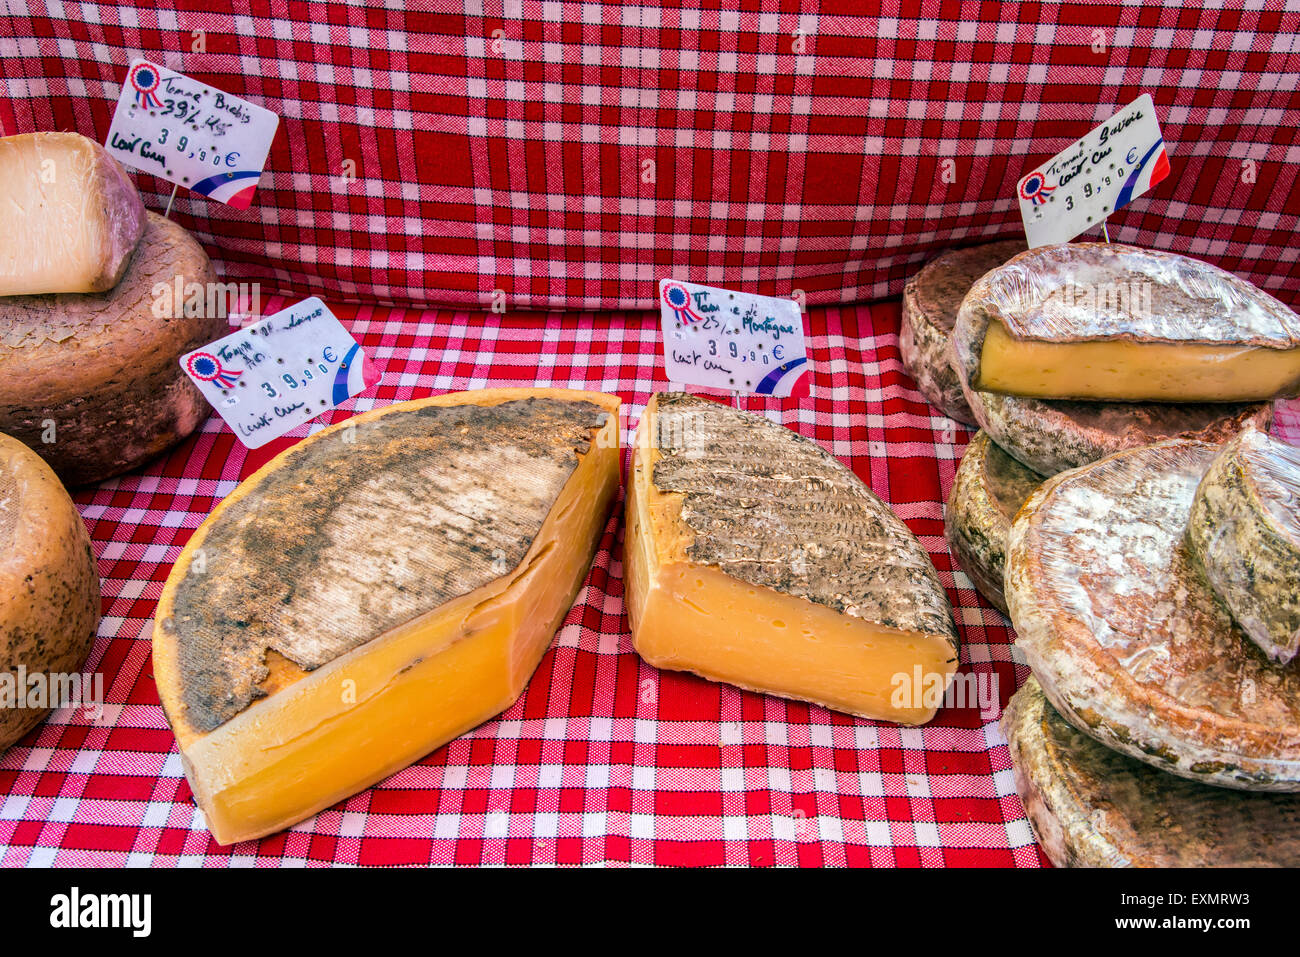 Local cheeses on sale at the market, Carpentras, Provence, France Stock Photo